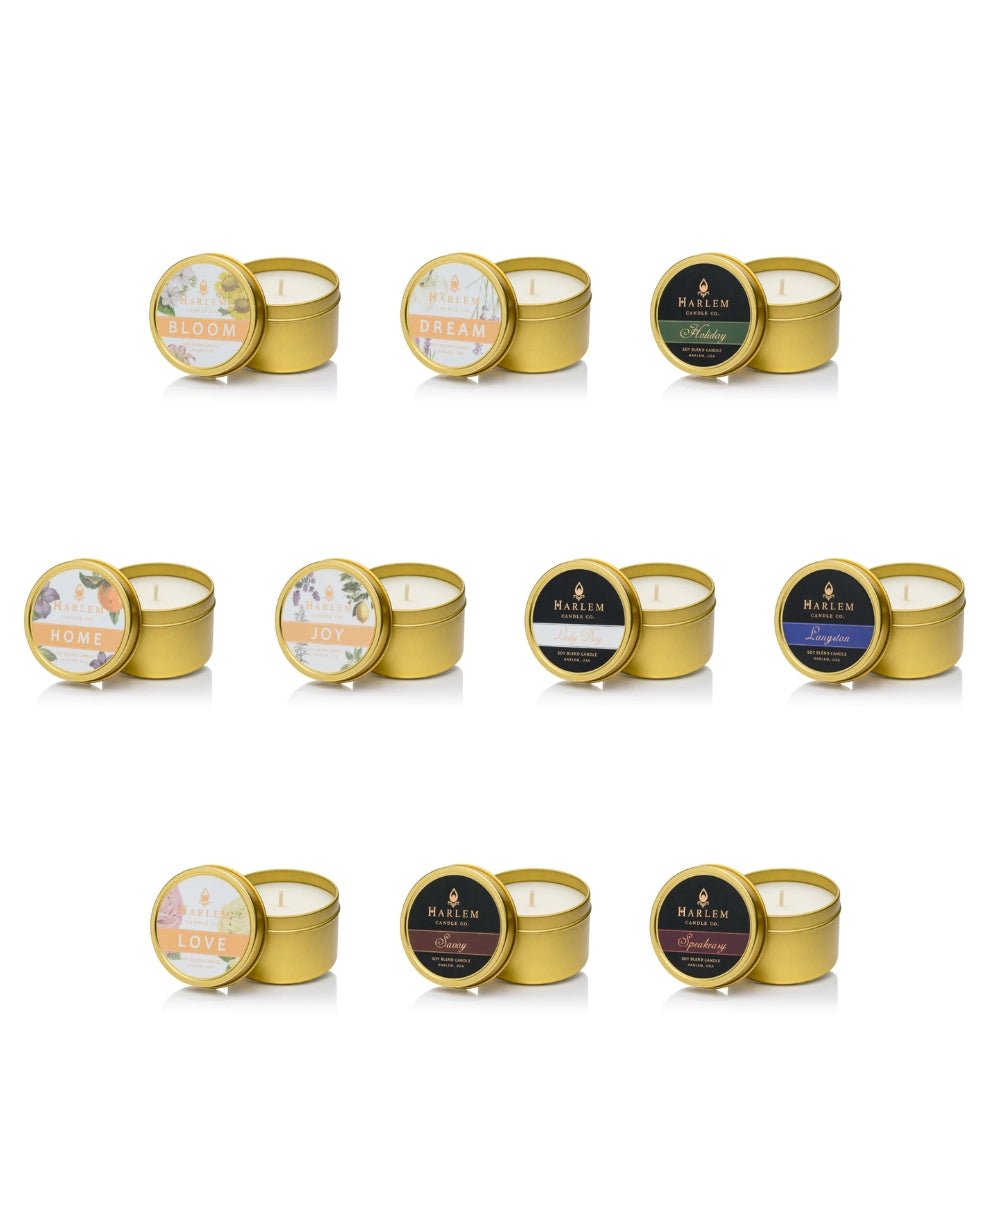 Choose your own set of 6 travel candles 